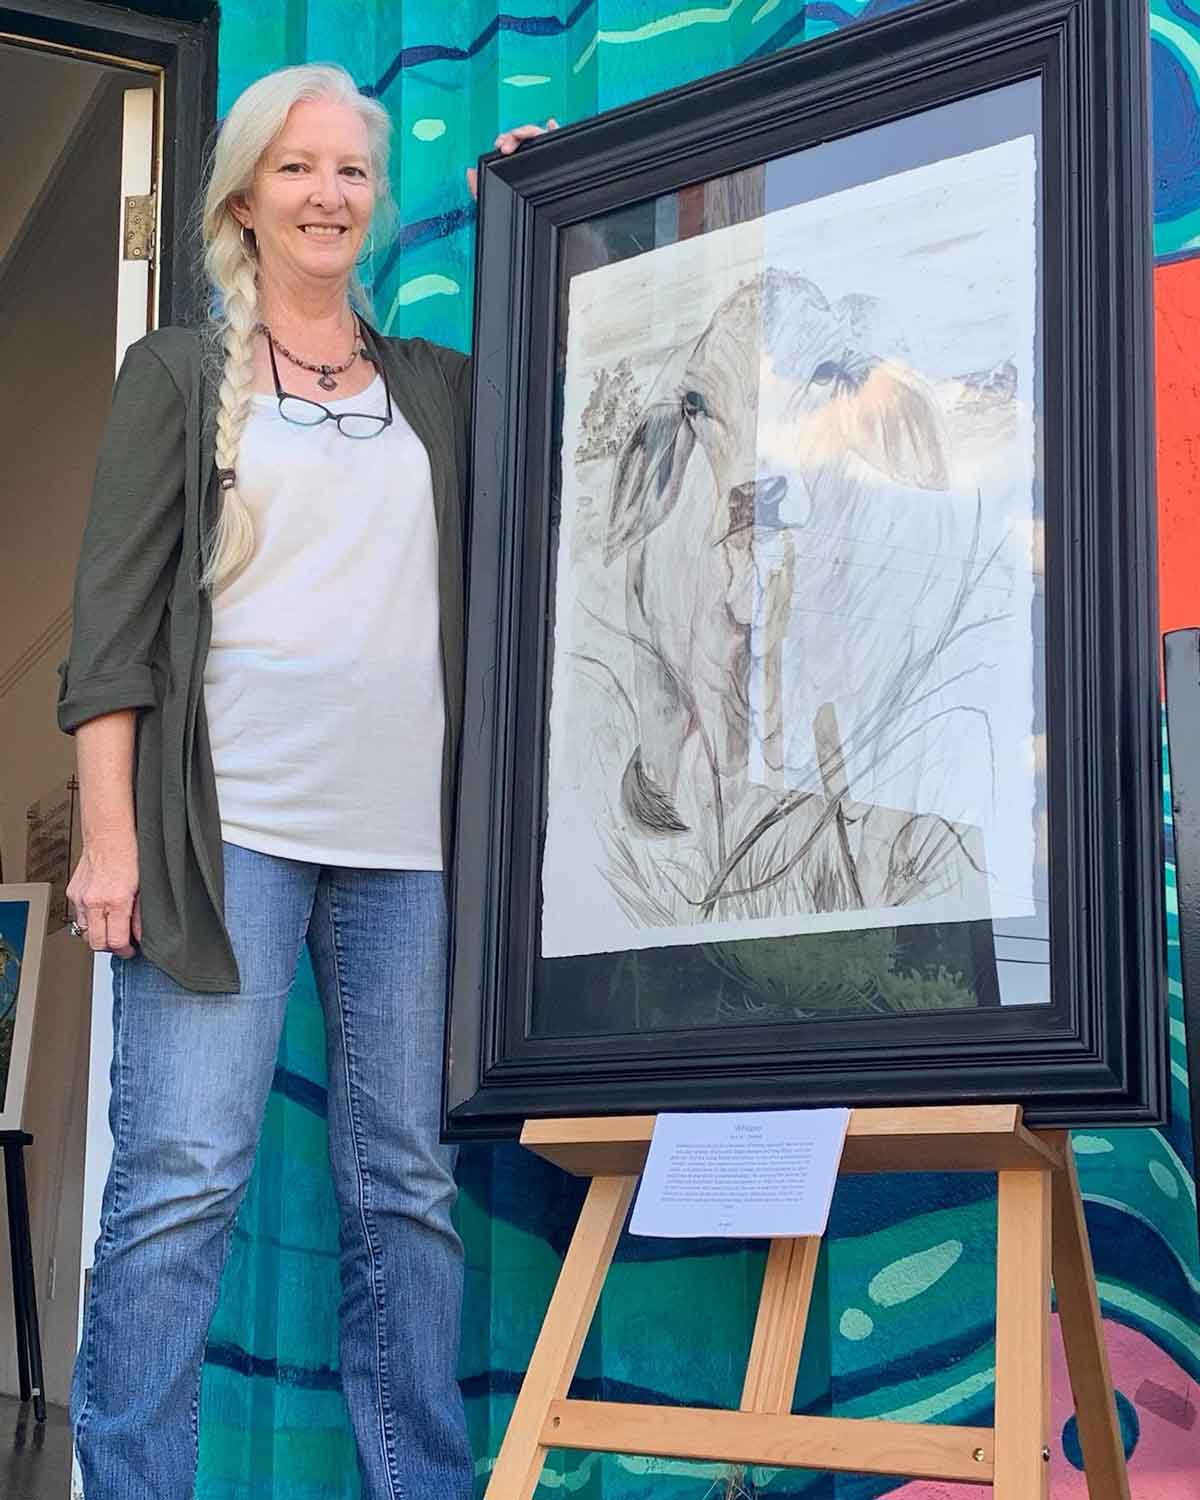 The framed painting of Whisper, with Madison Woods (the artist) for size context.